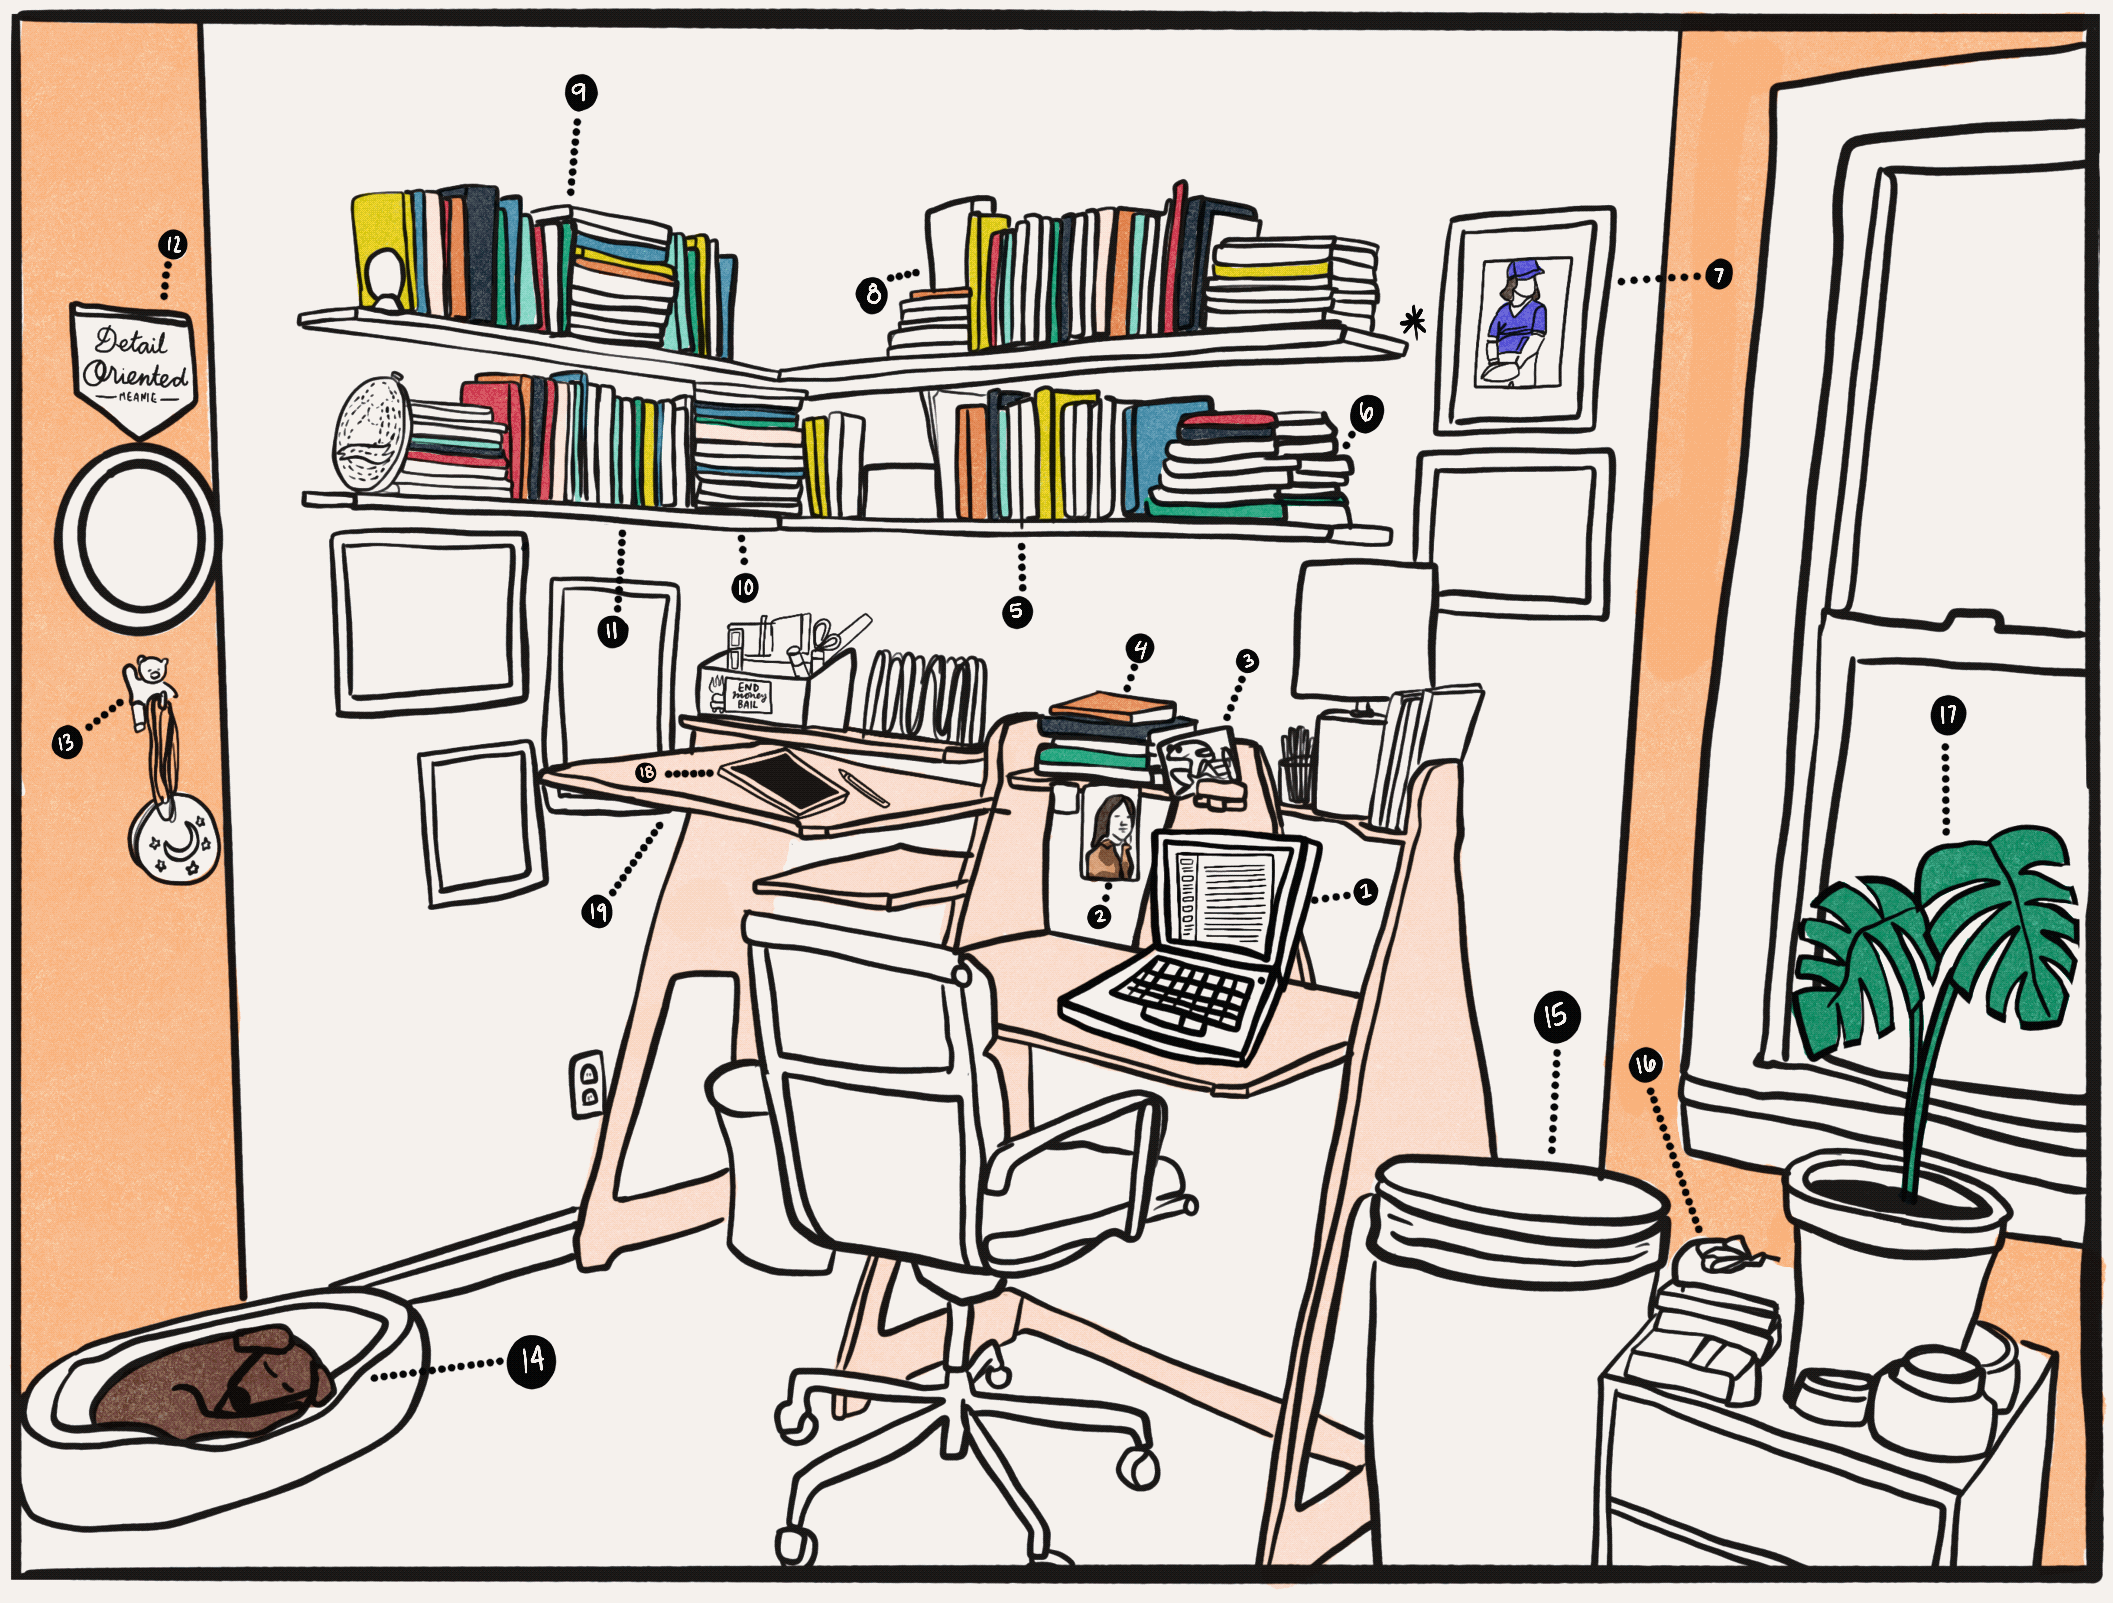 An animated .gif of one workspace. In one frame the workspace is clean and organized organized and in the other frame the same workspace is disorganized and messy.